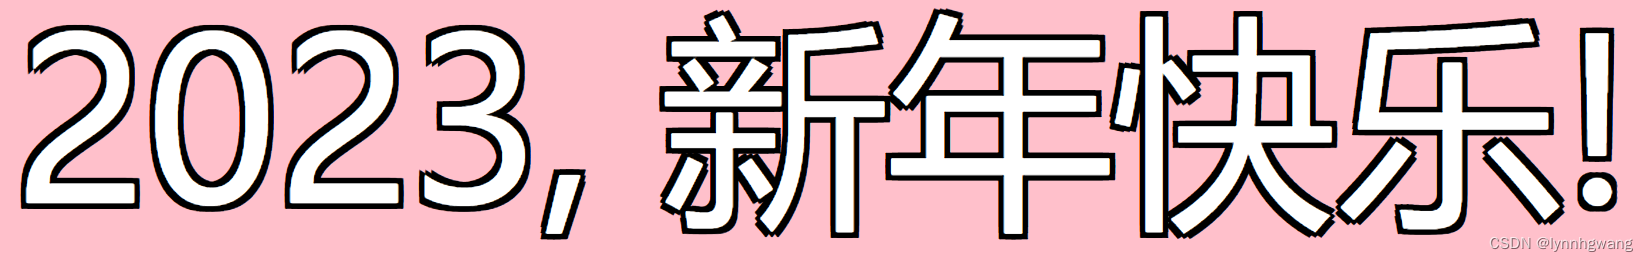 【CSS】<span style='color:red;'>文字</span>描边<span style='color:red;'>的</span><span style='color:red;'>三</span><span style='color:red;'>种</span>实现<span style='color:red;'>方式</span>